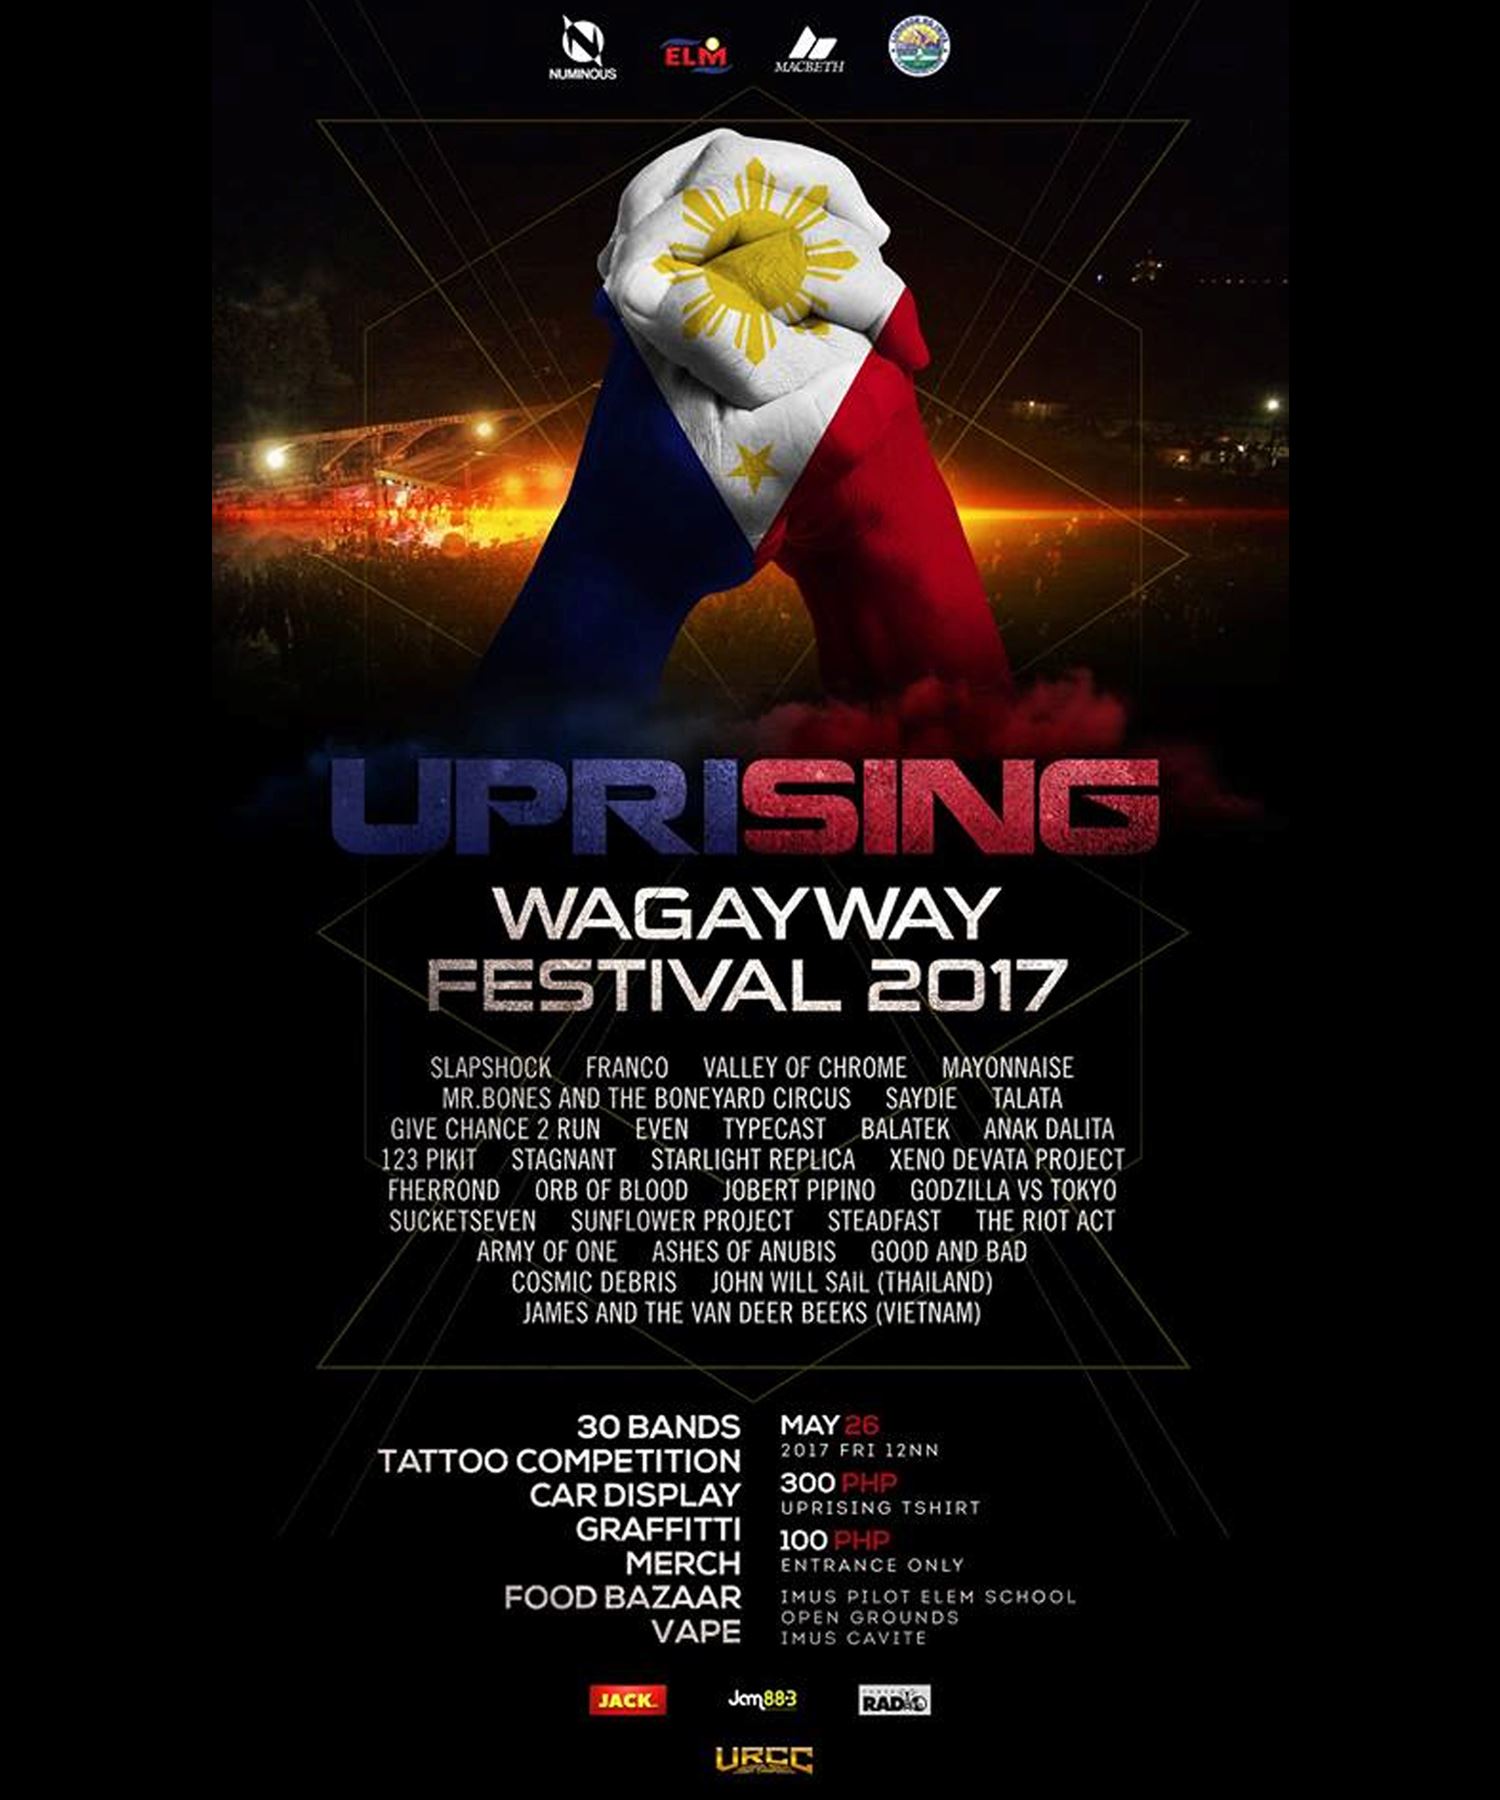 Uprising Wagayway Festival 2017: What you need to know